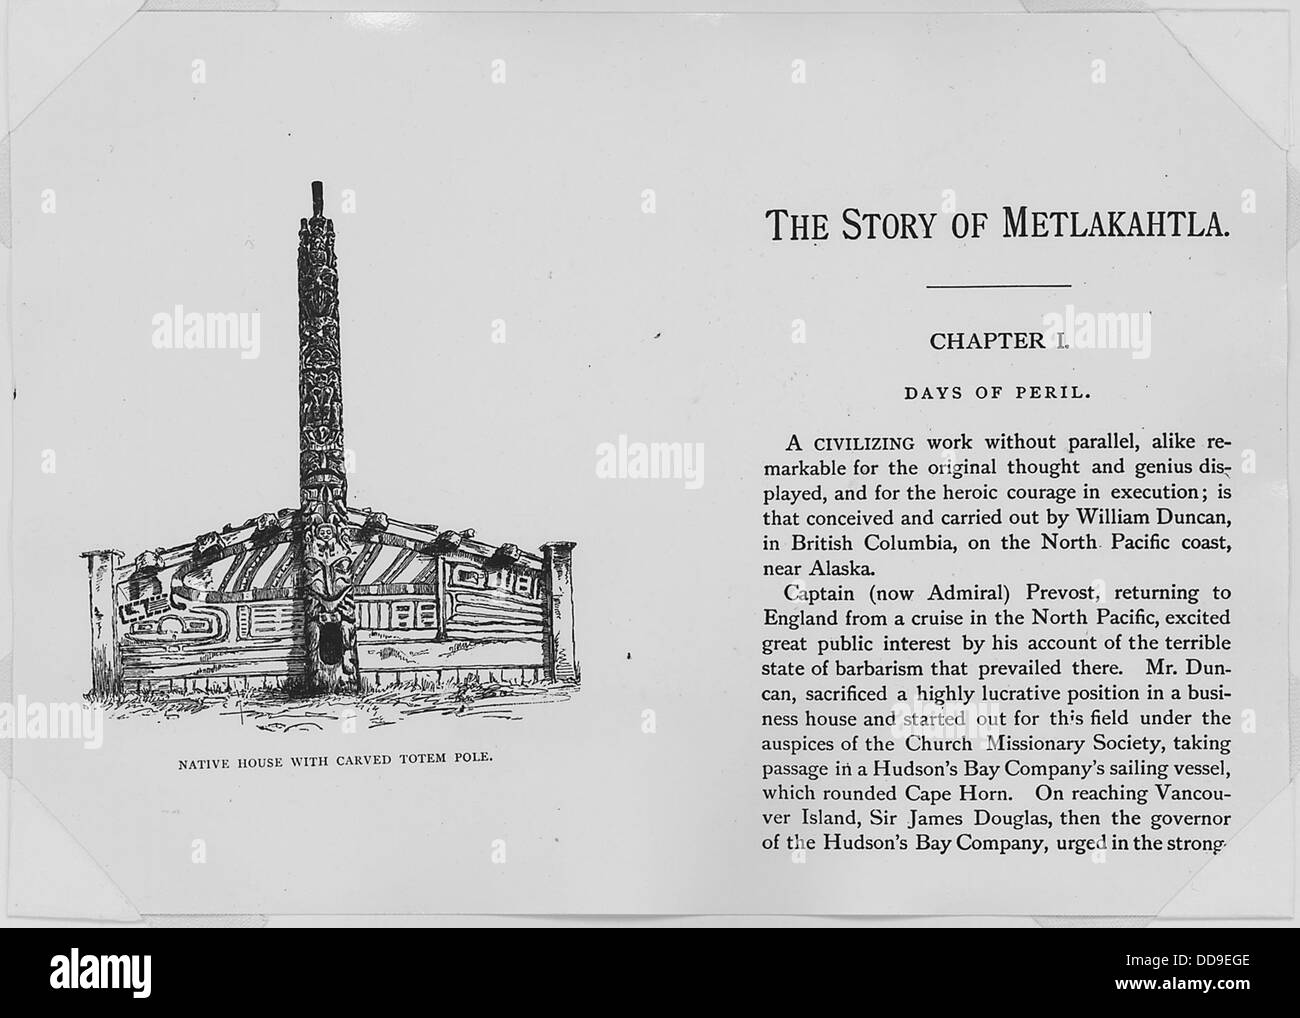 Henry S. Wellcome, The Story of Metlakahtla, 4th. edn., London and New York, 1887. Frontispiece and first page. - - 298062 Stock Photo